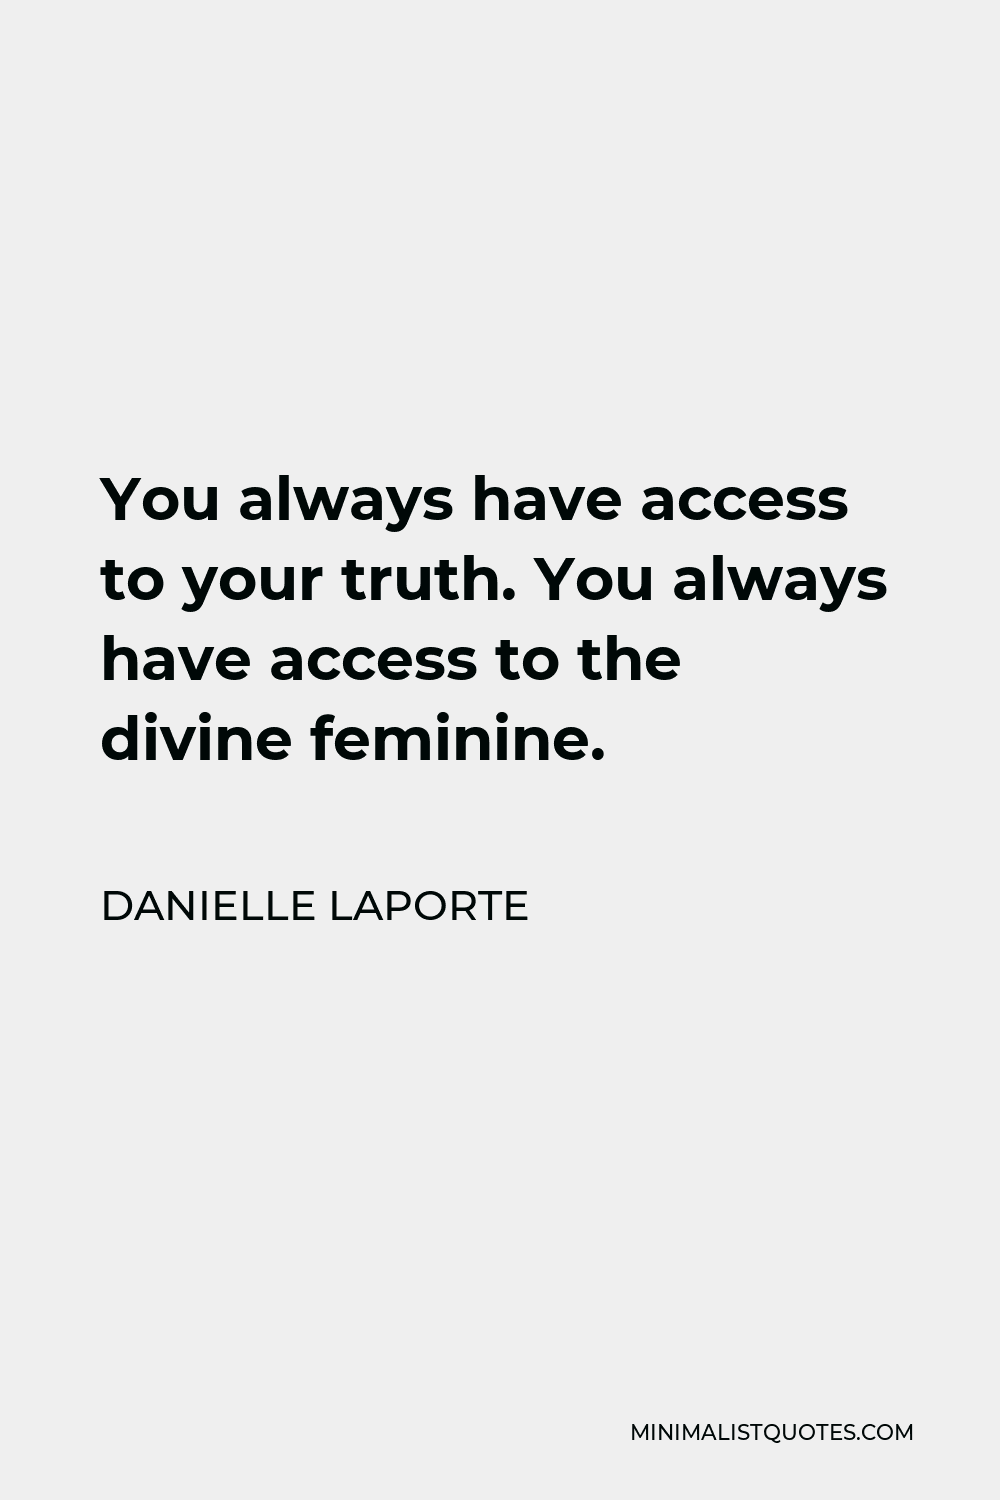 Danielle Laporte Quote You Always Have Access To Your Truth You Always Have Access To The 6362